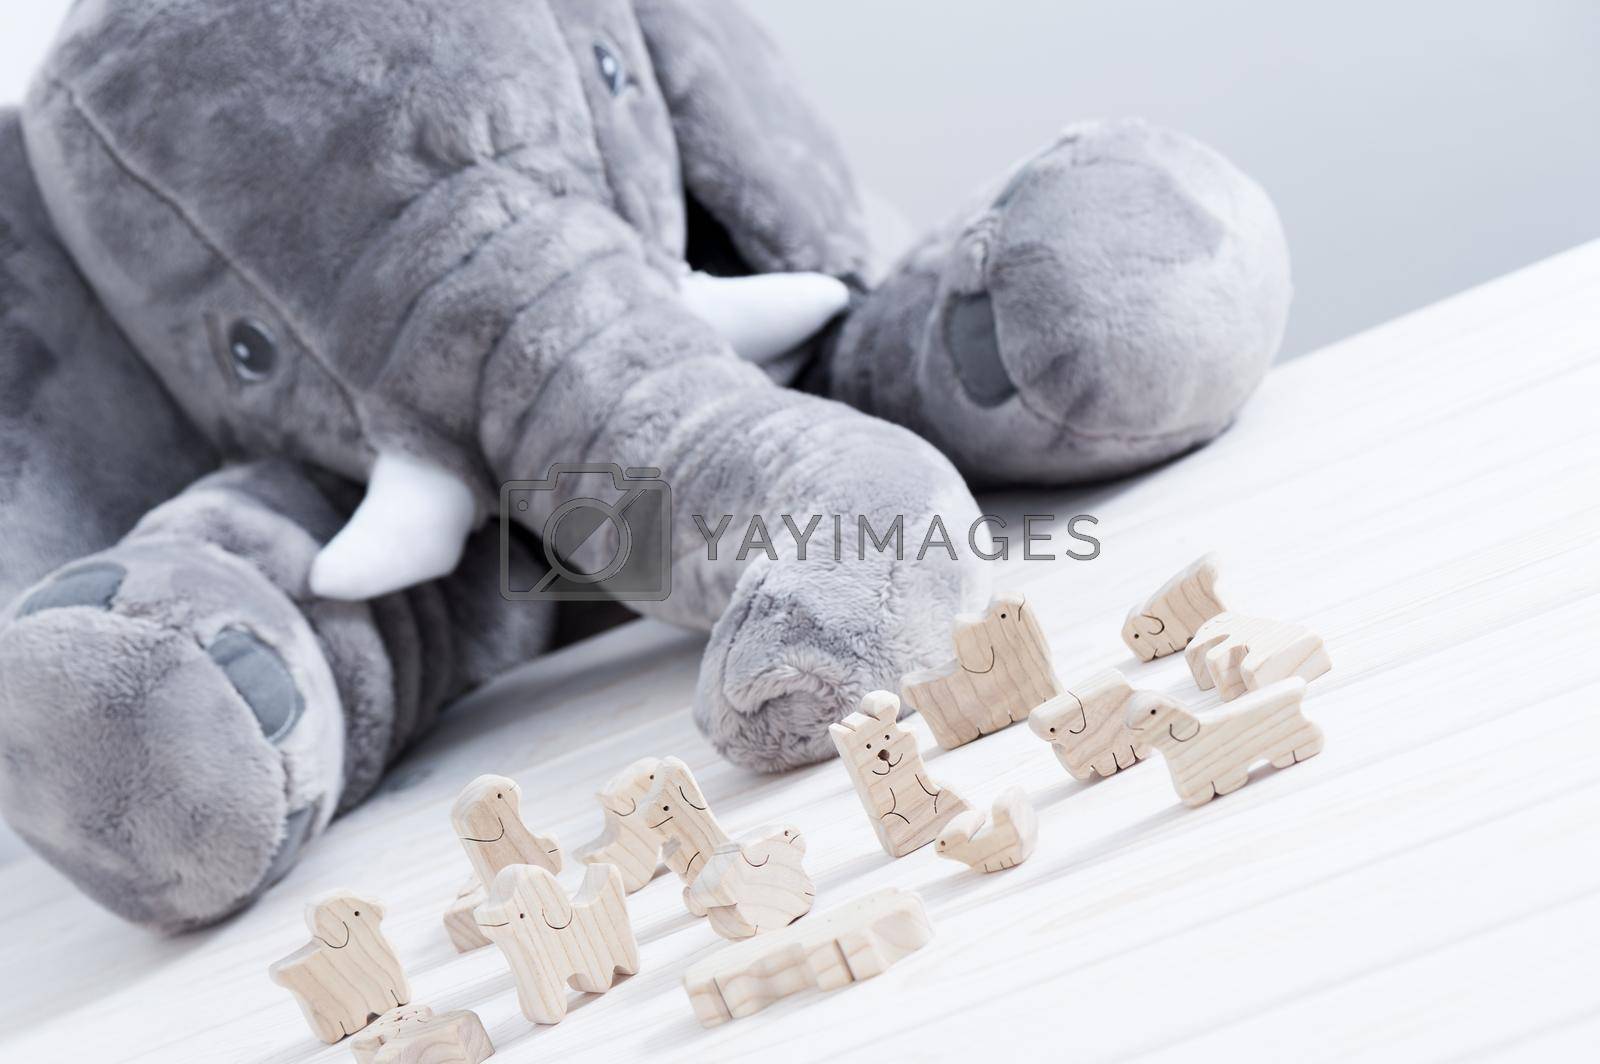 cute wooden toy animals on white wood plank with giant elephant doll in the background